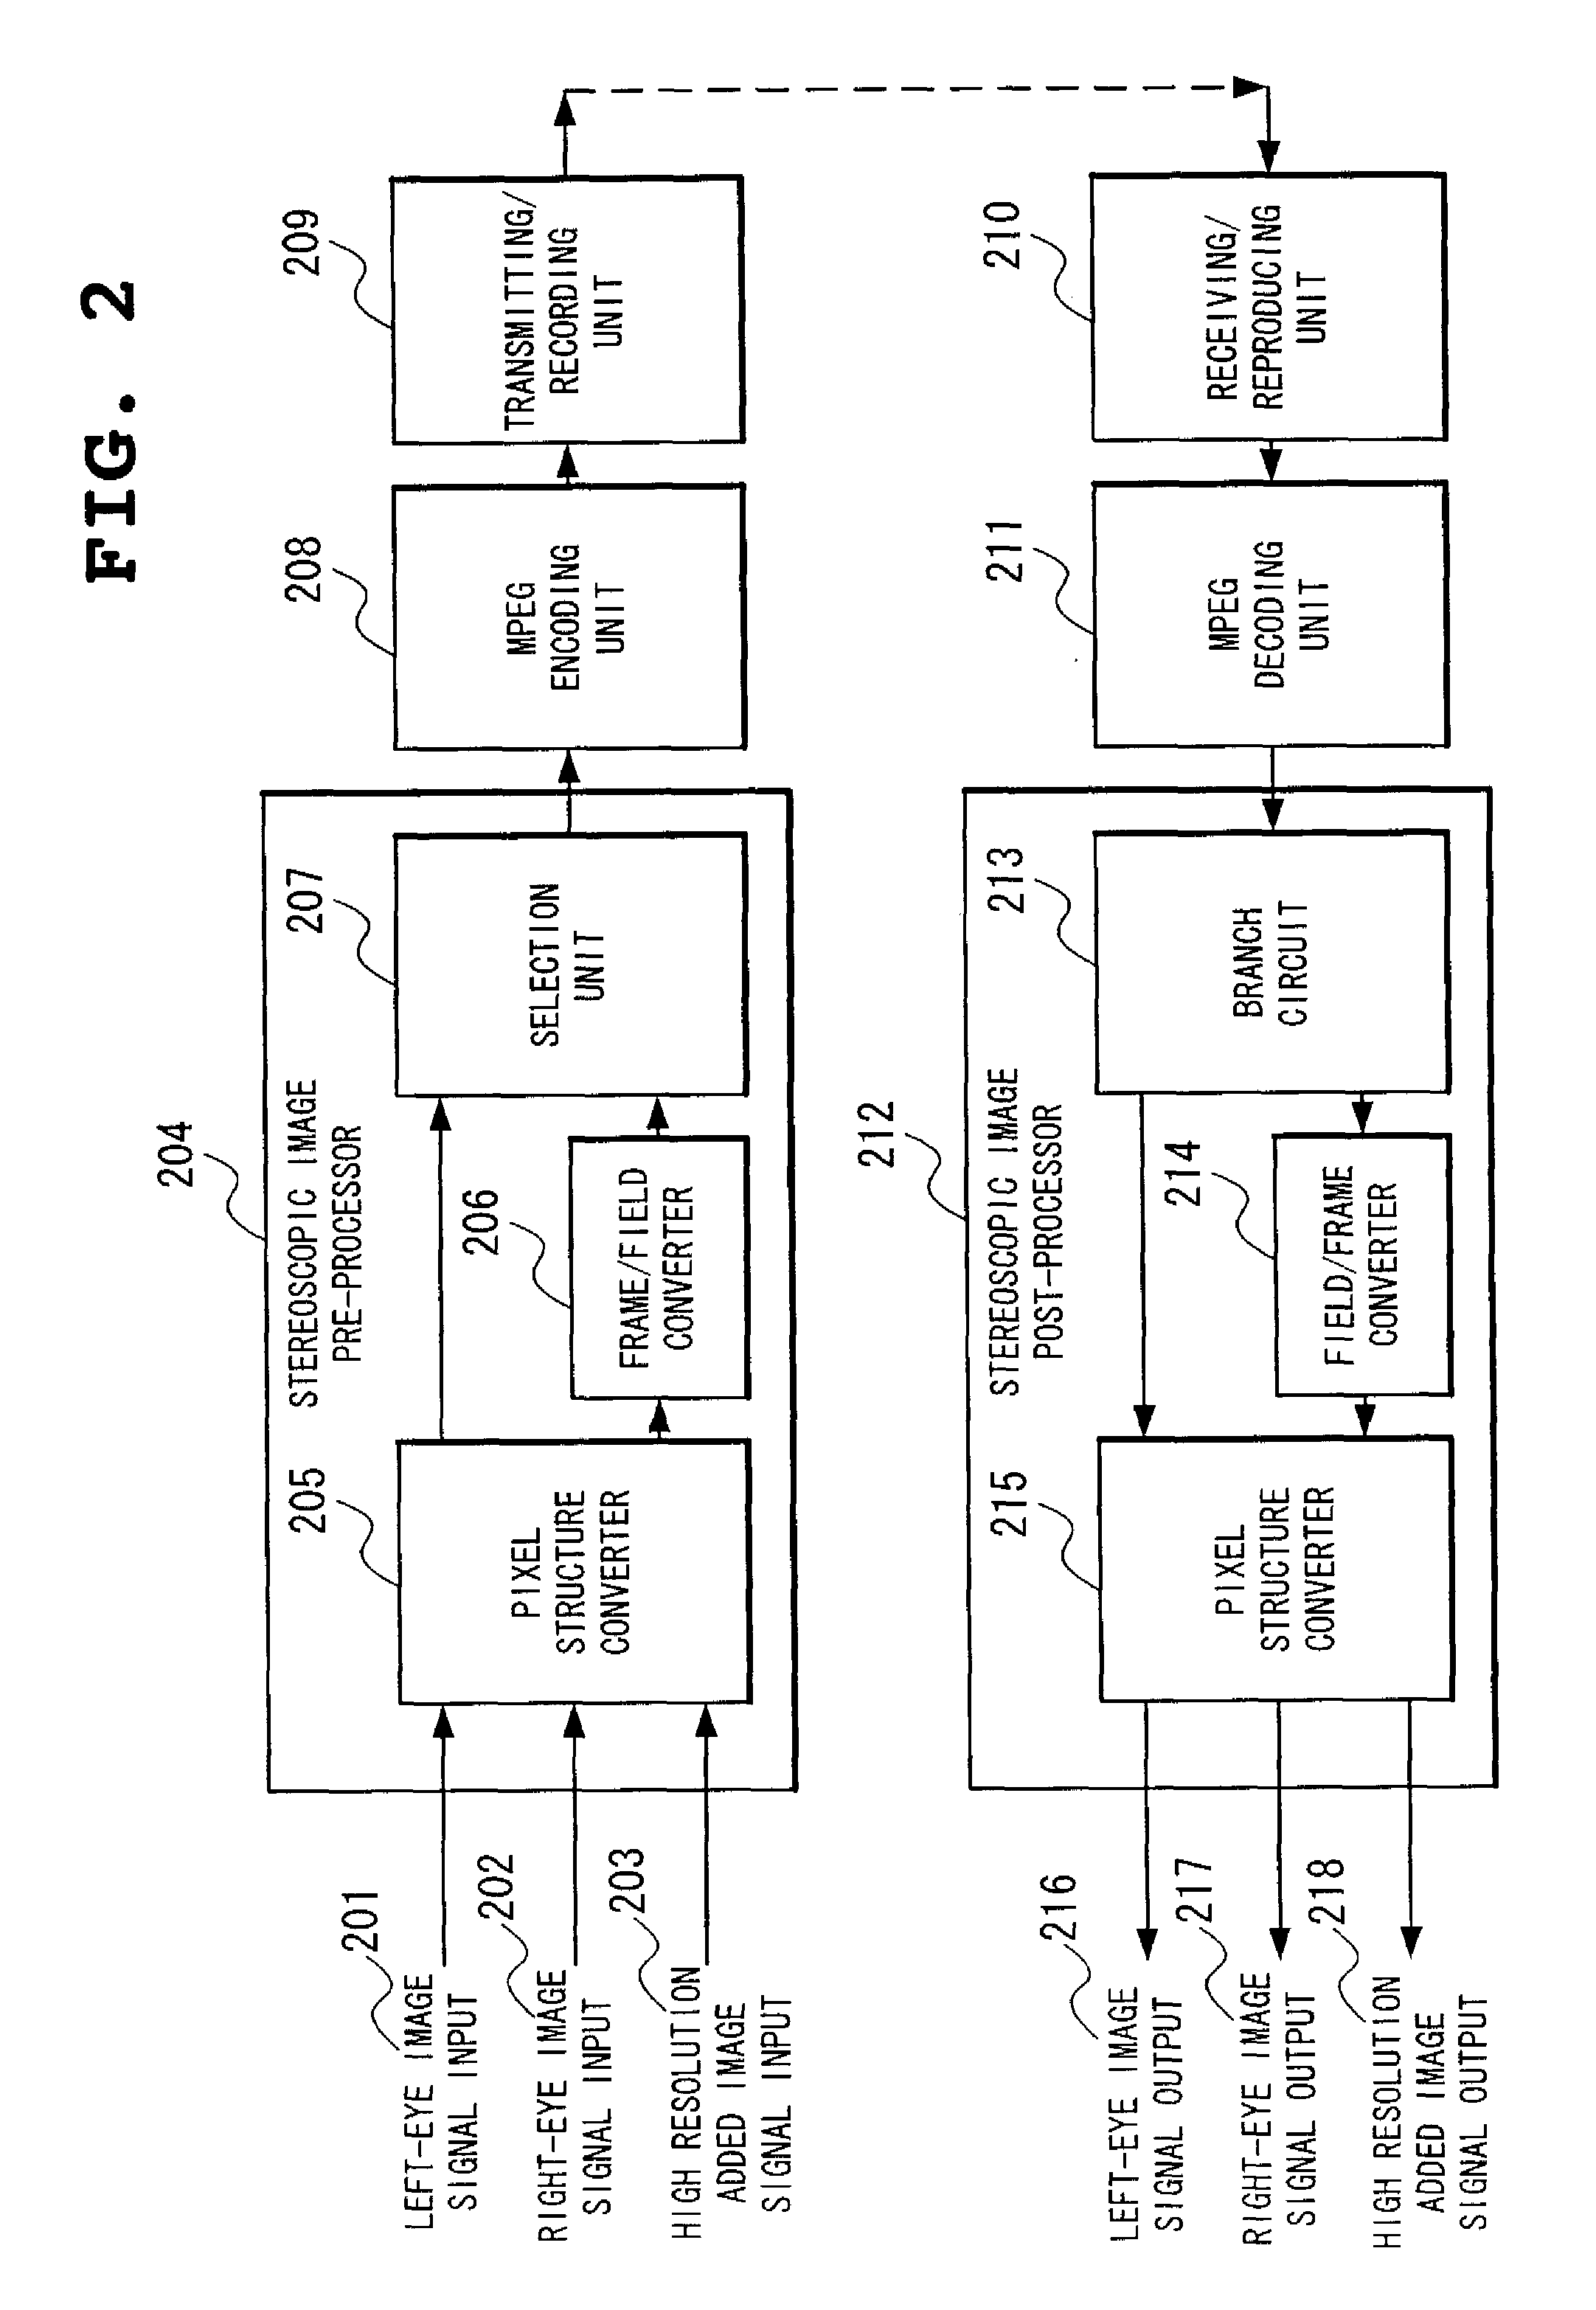 Stereoscopic image encoding and decoding device multiplexing high resolution added images